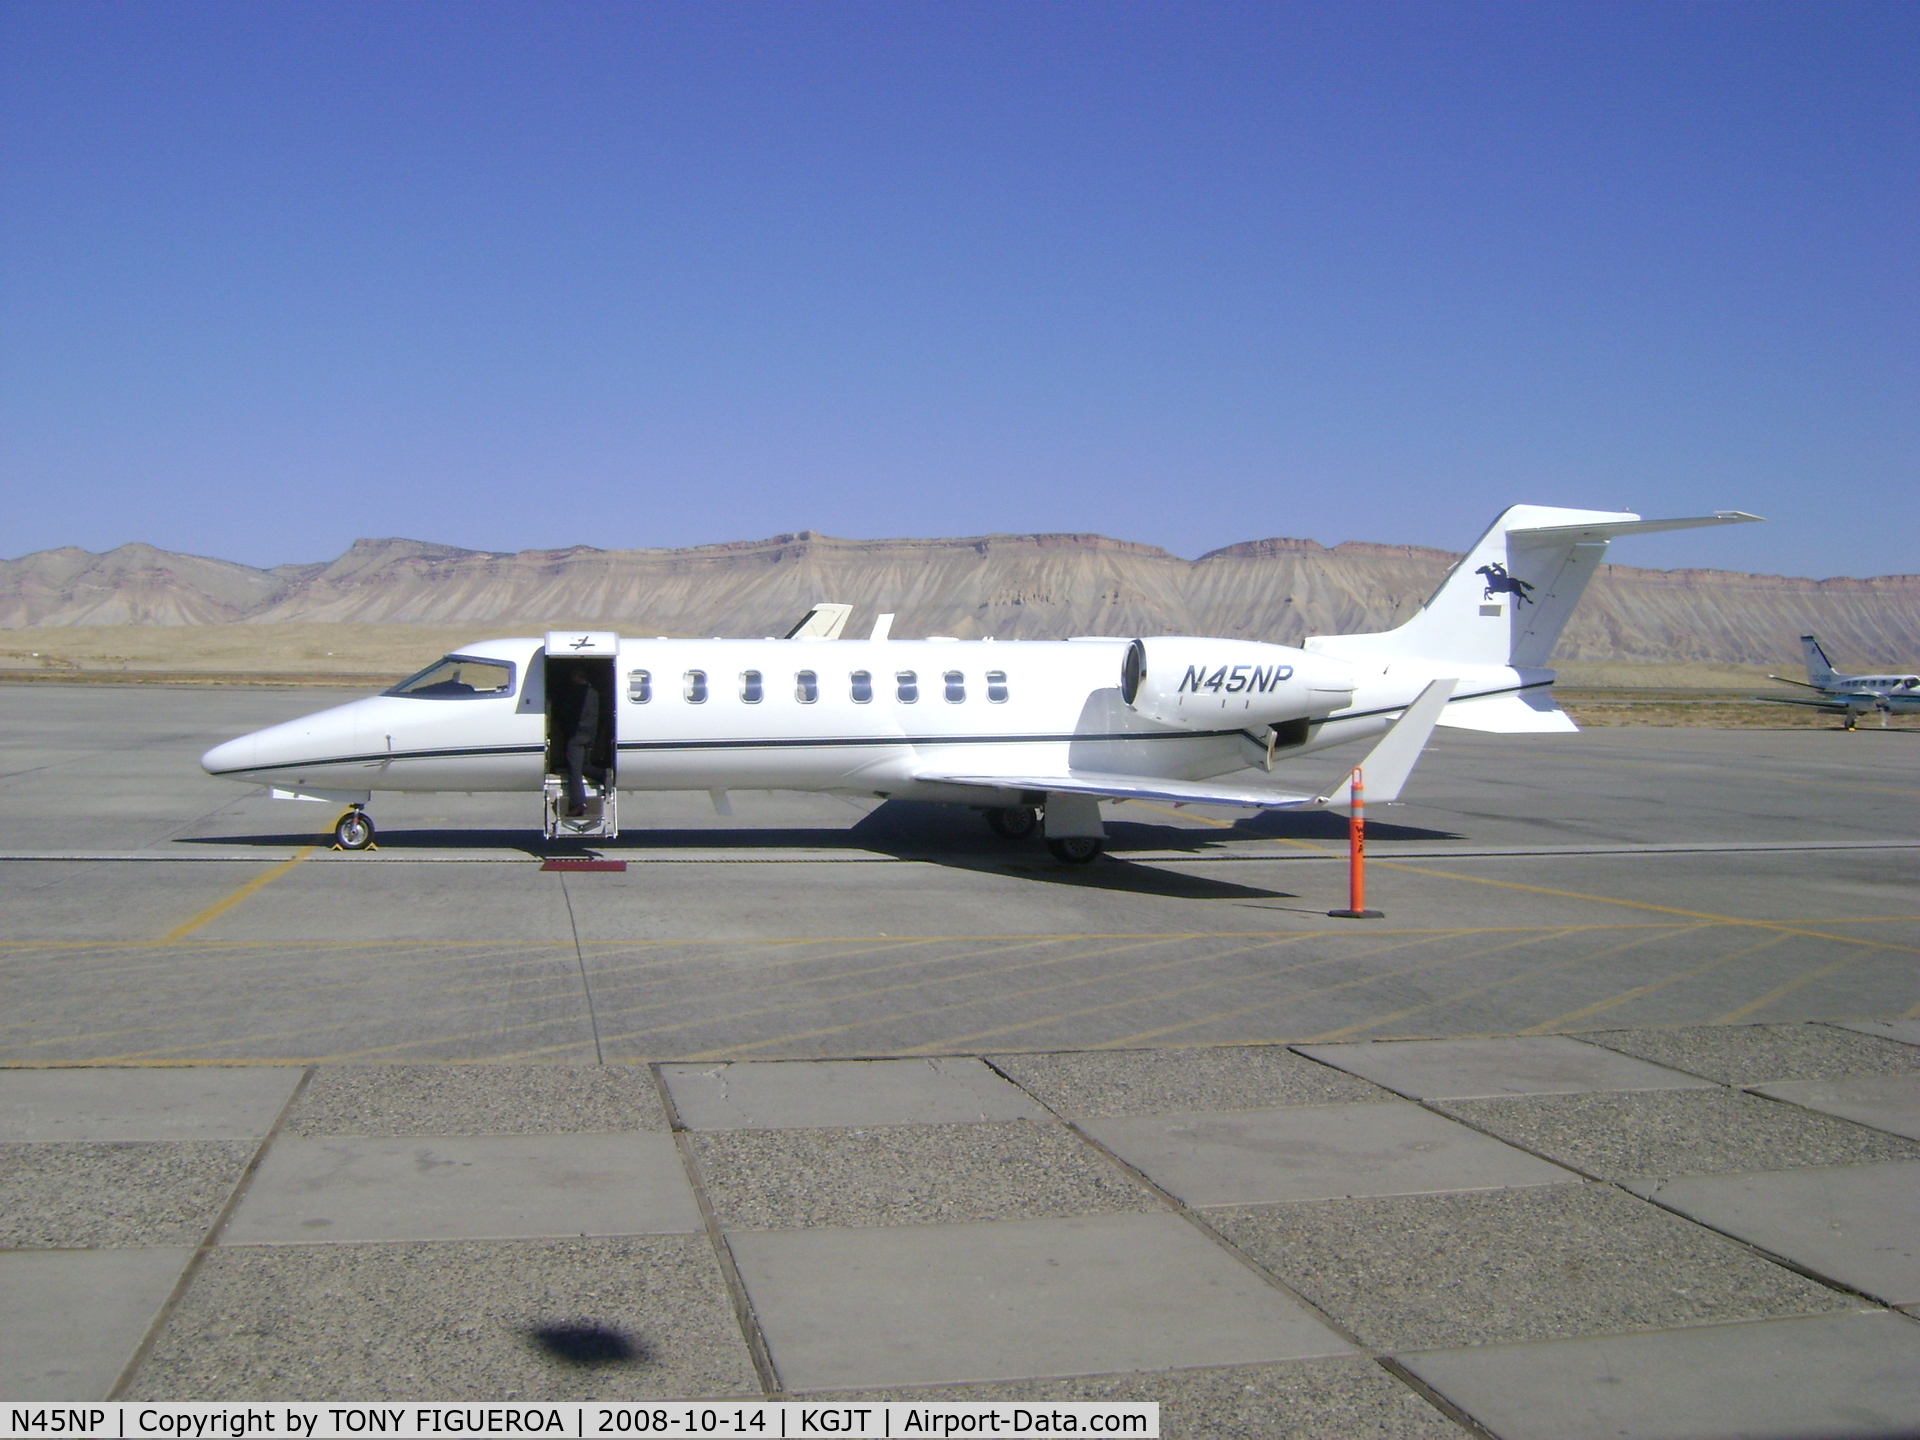 N45NP, 2002 Learjet Inc 45 C/N 204, THIS IS ONE OF THE MOST FUN AIRPLANES I'VE EVER FLOWN, IT CAN BE A HAND FULL!